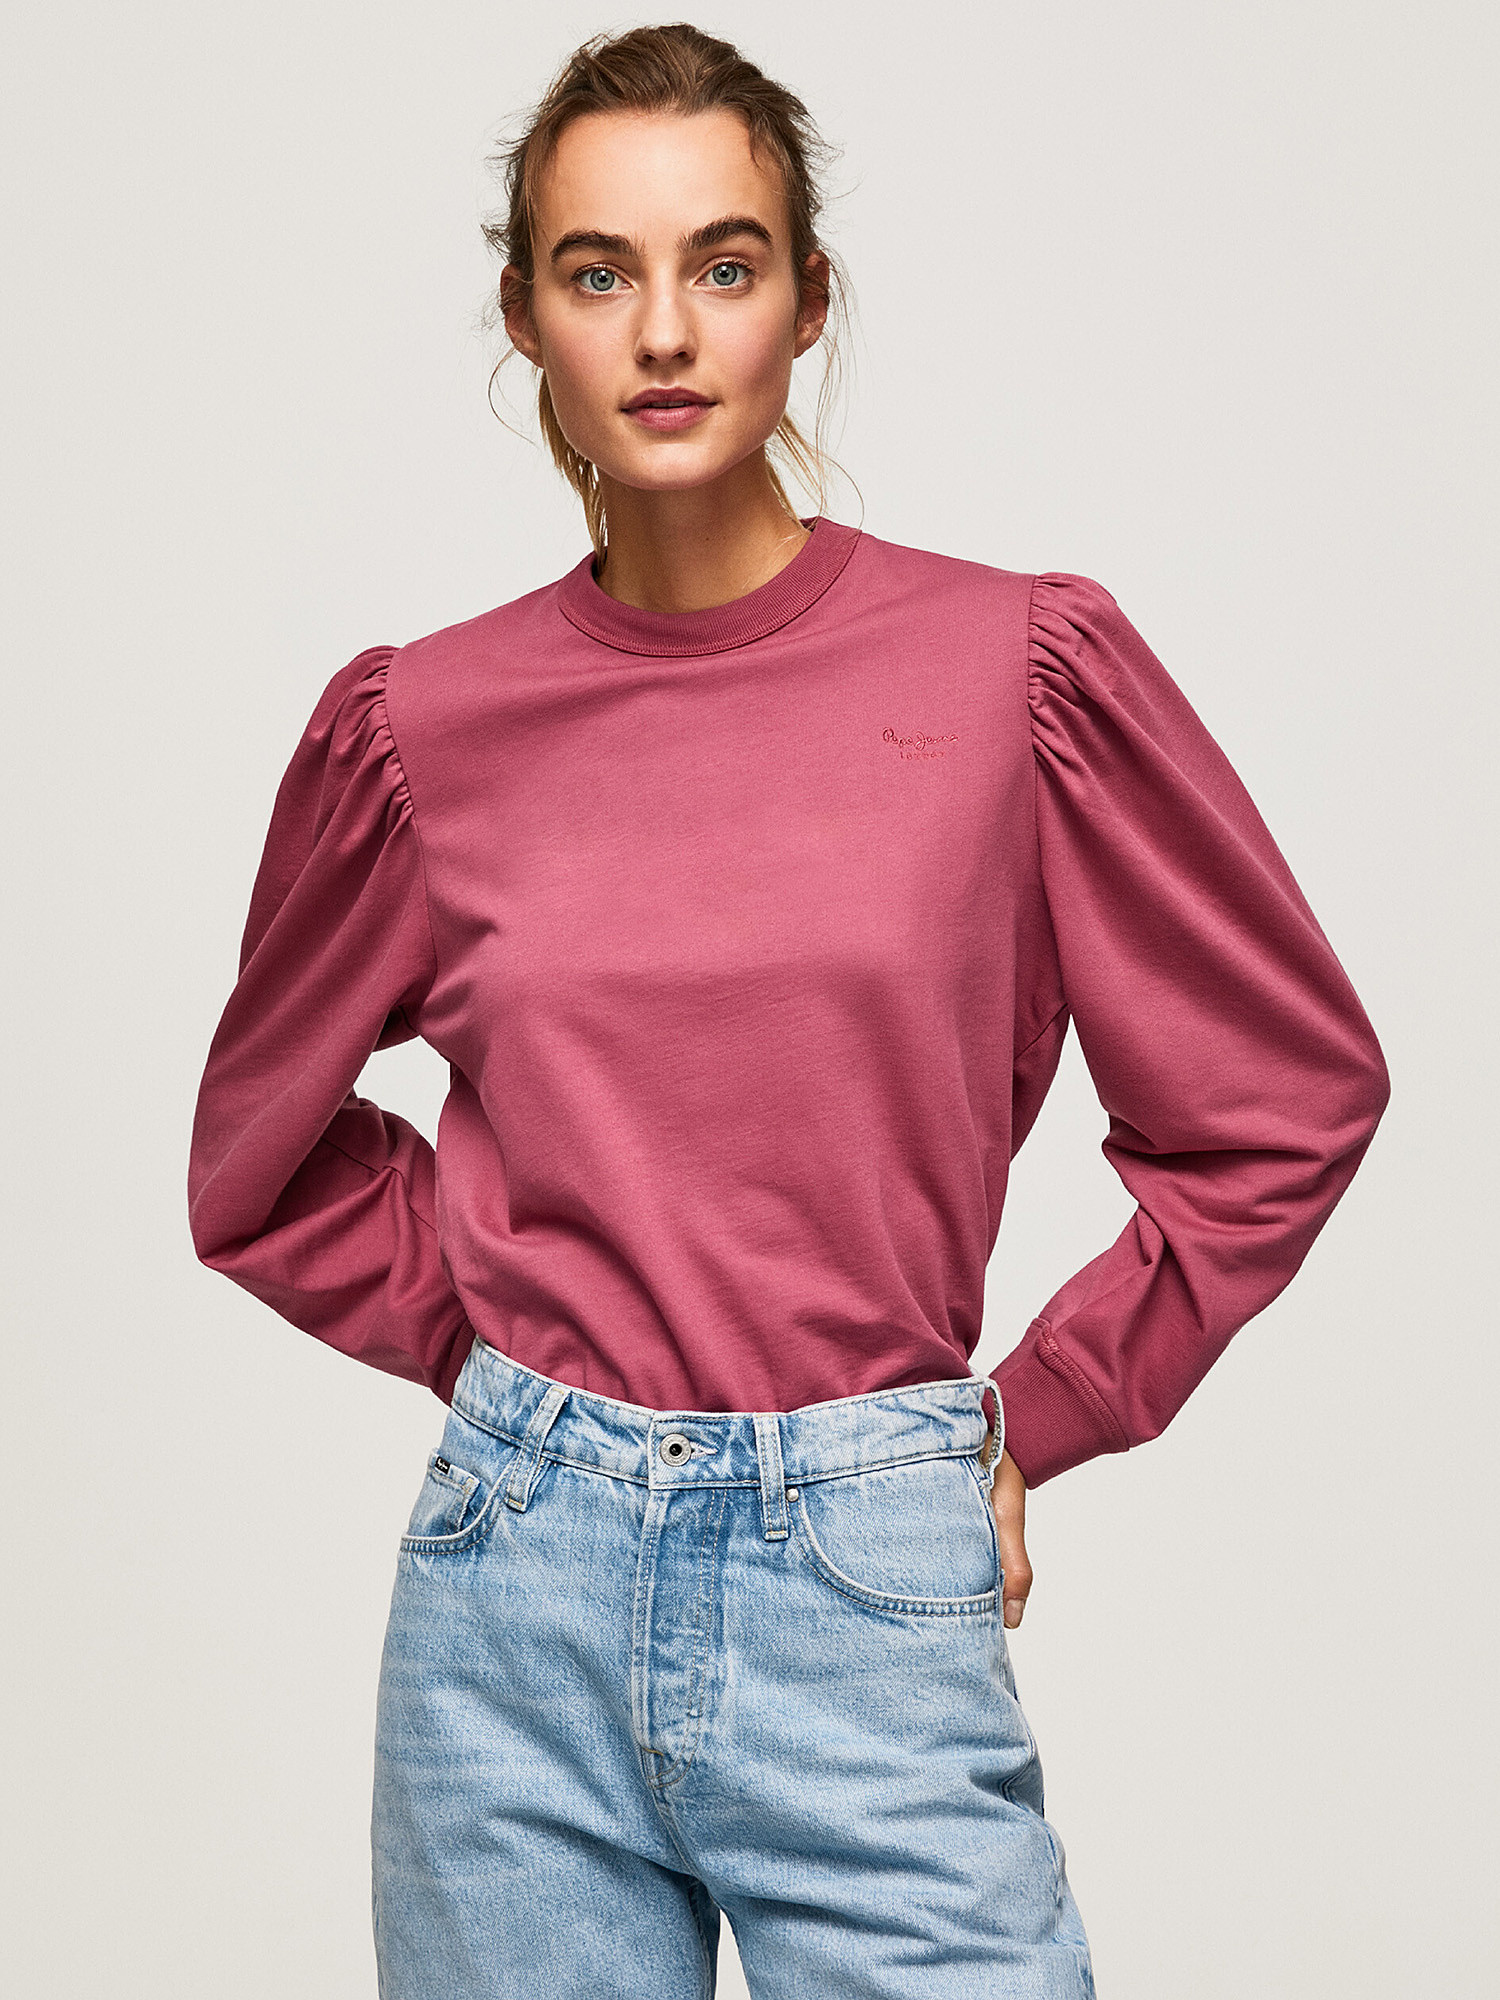 Pepe Jeans - Sweatshirt with puff sleeves, Antique Pink, large image number 2